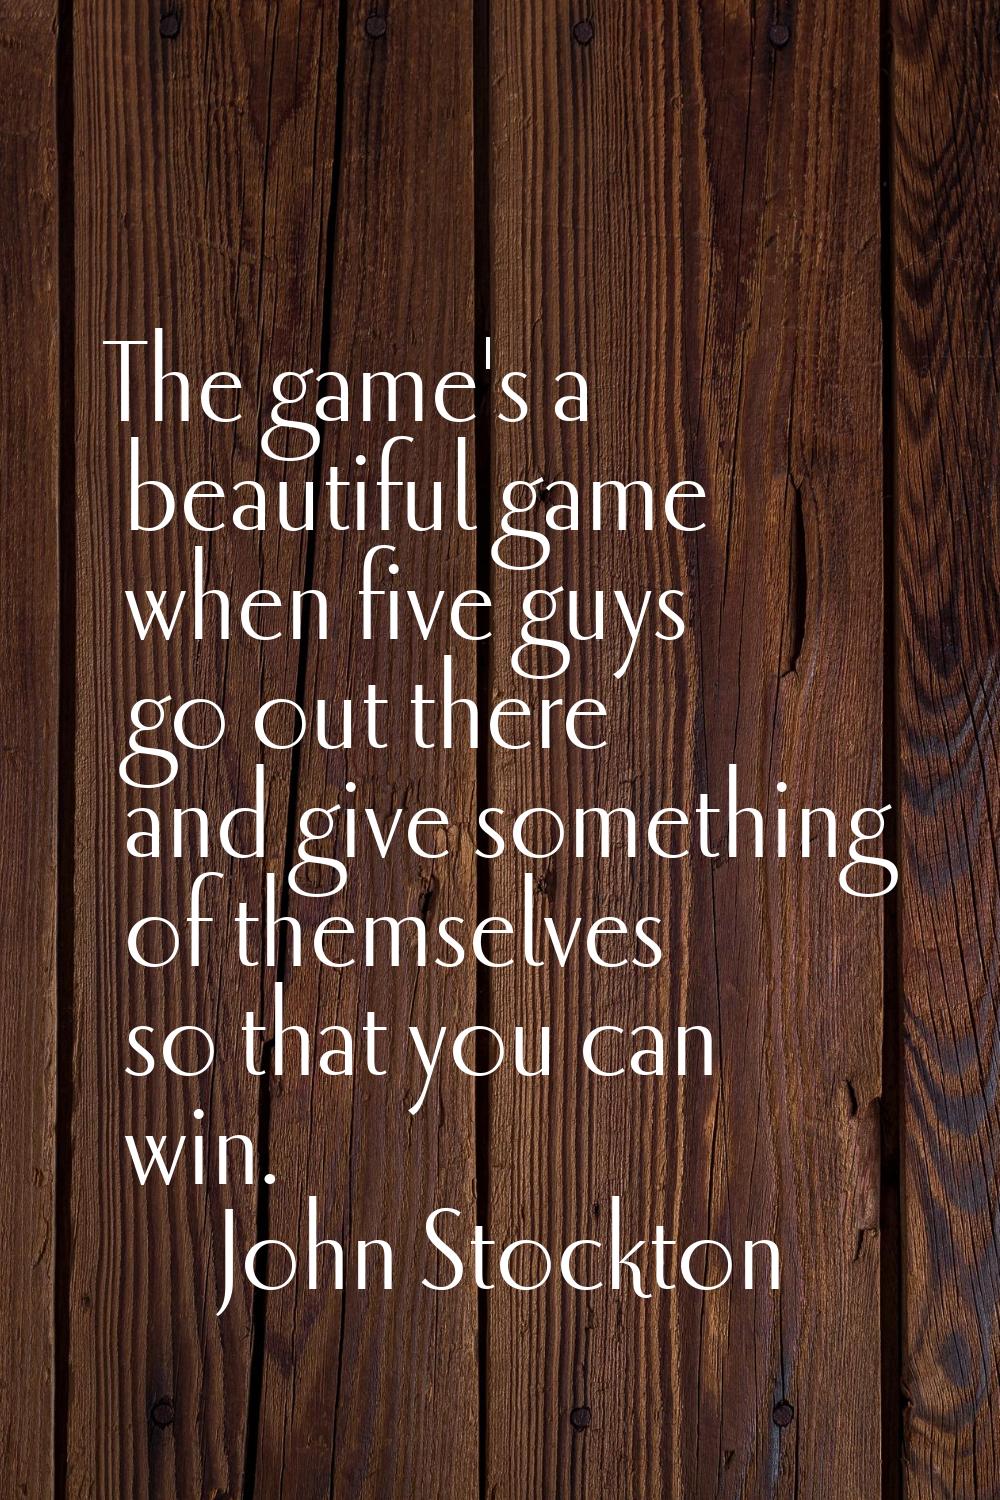 The game's a beautiful game when five guys go out there and give something of themselves so that yo